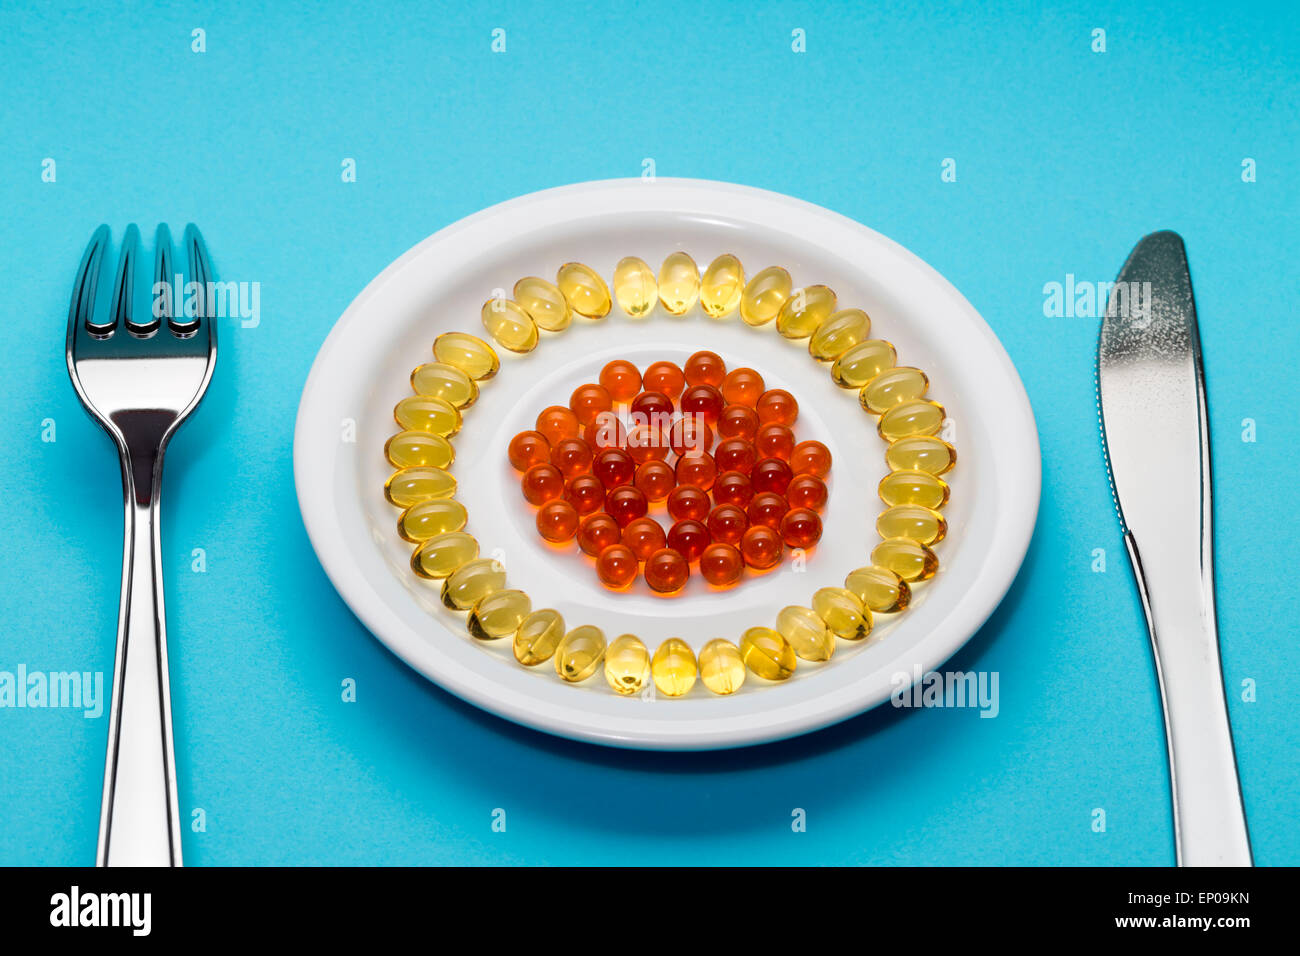 Yellow and red pills on a plate on blue background Stock Photo